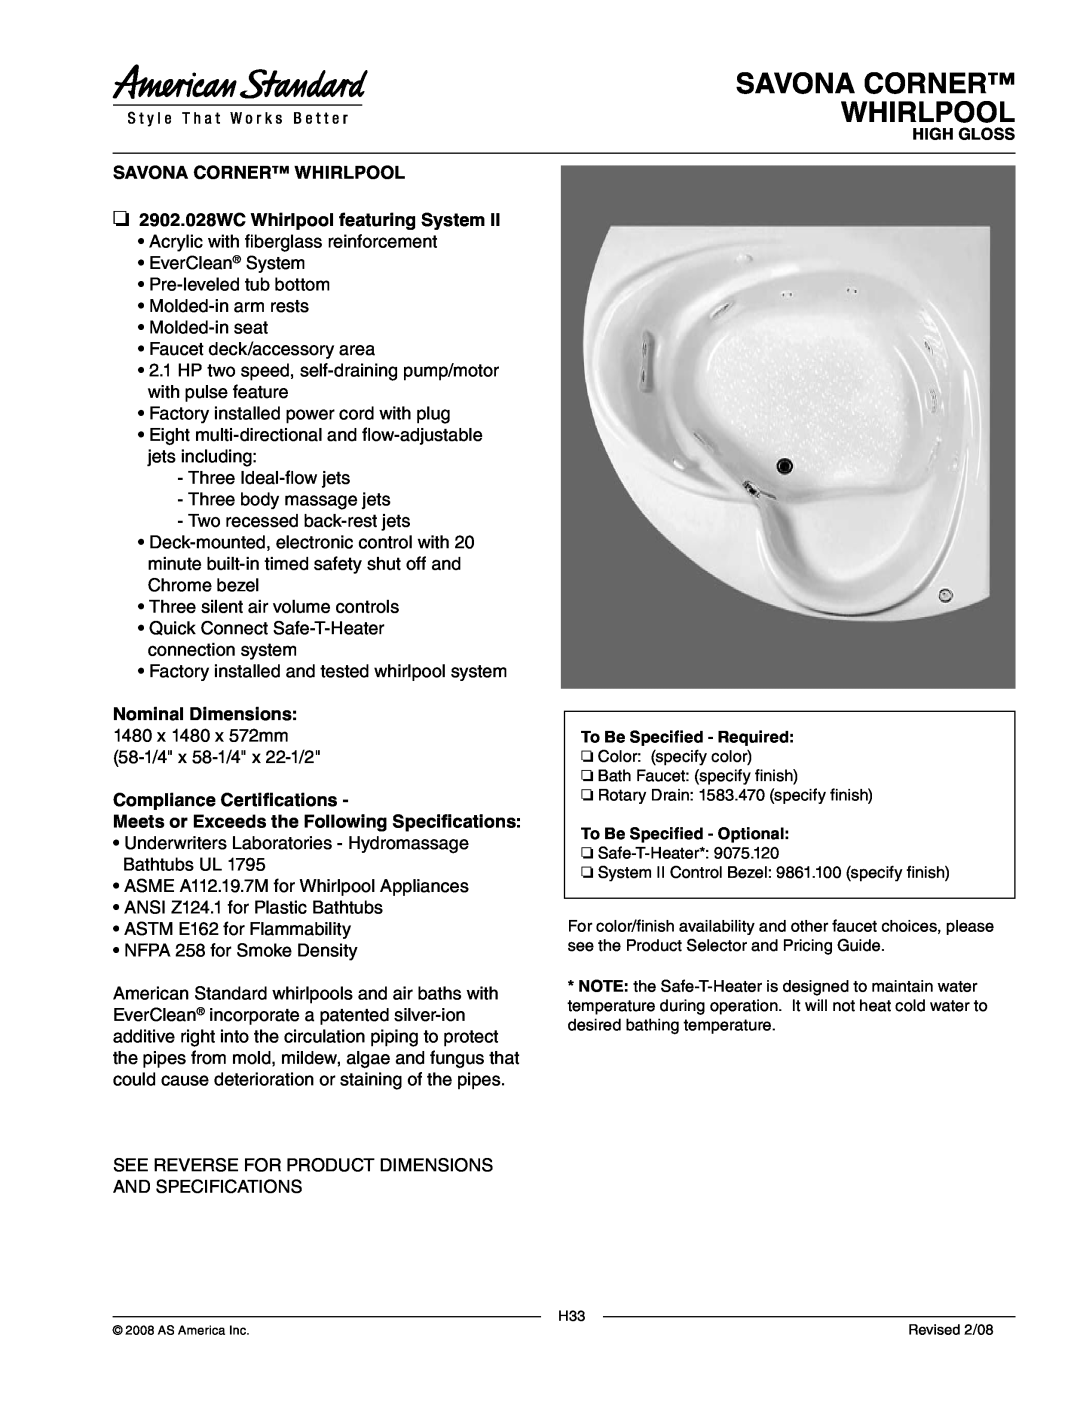 American Standard 2902.028WC dimensions Savona Corner Whirlpool, Nominal Dimensions, Compliance Certifications 